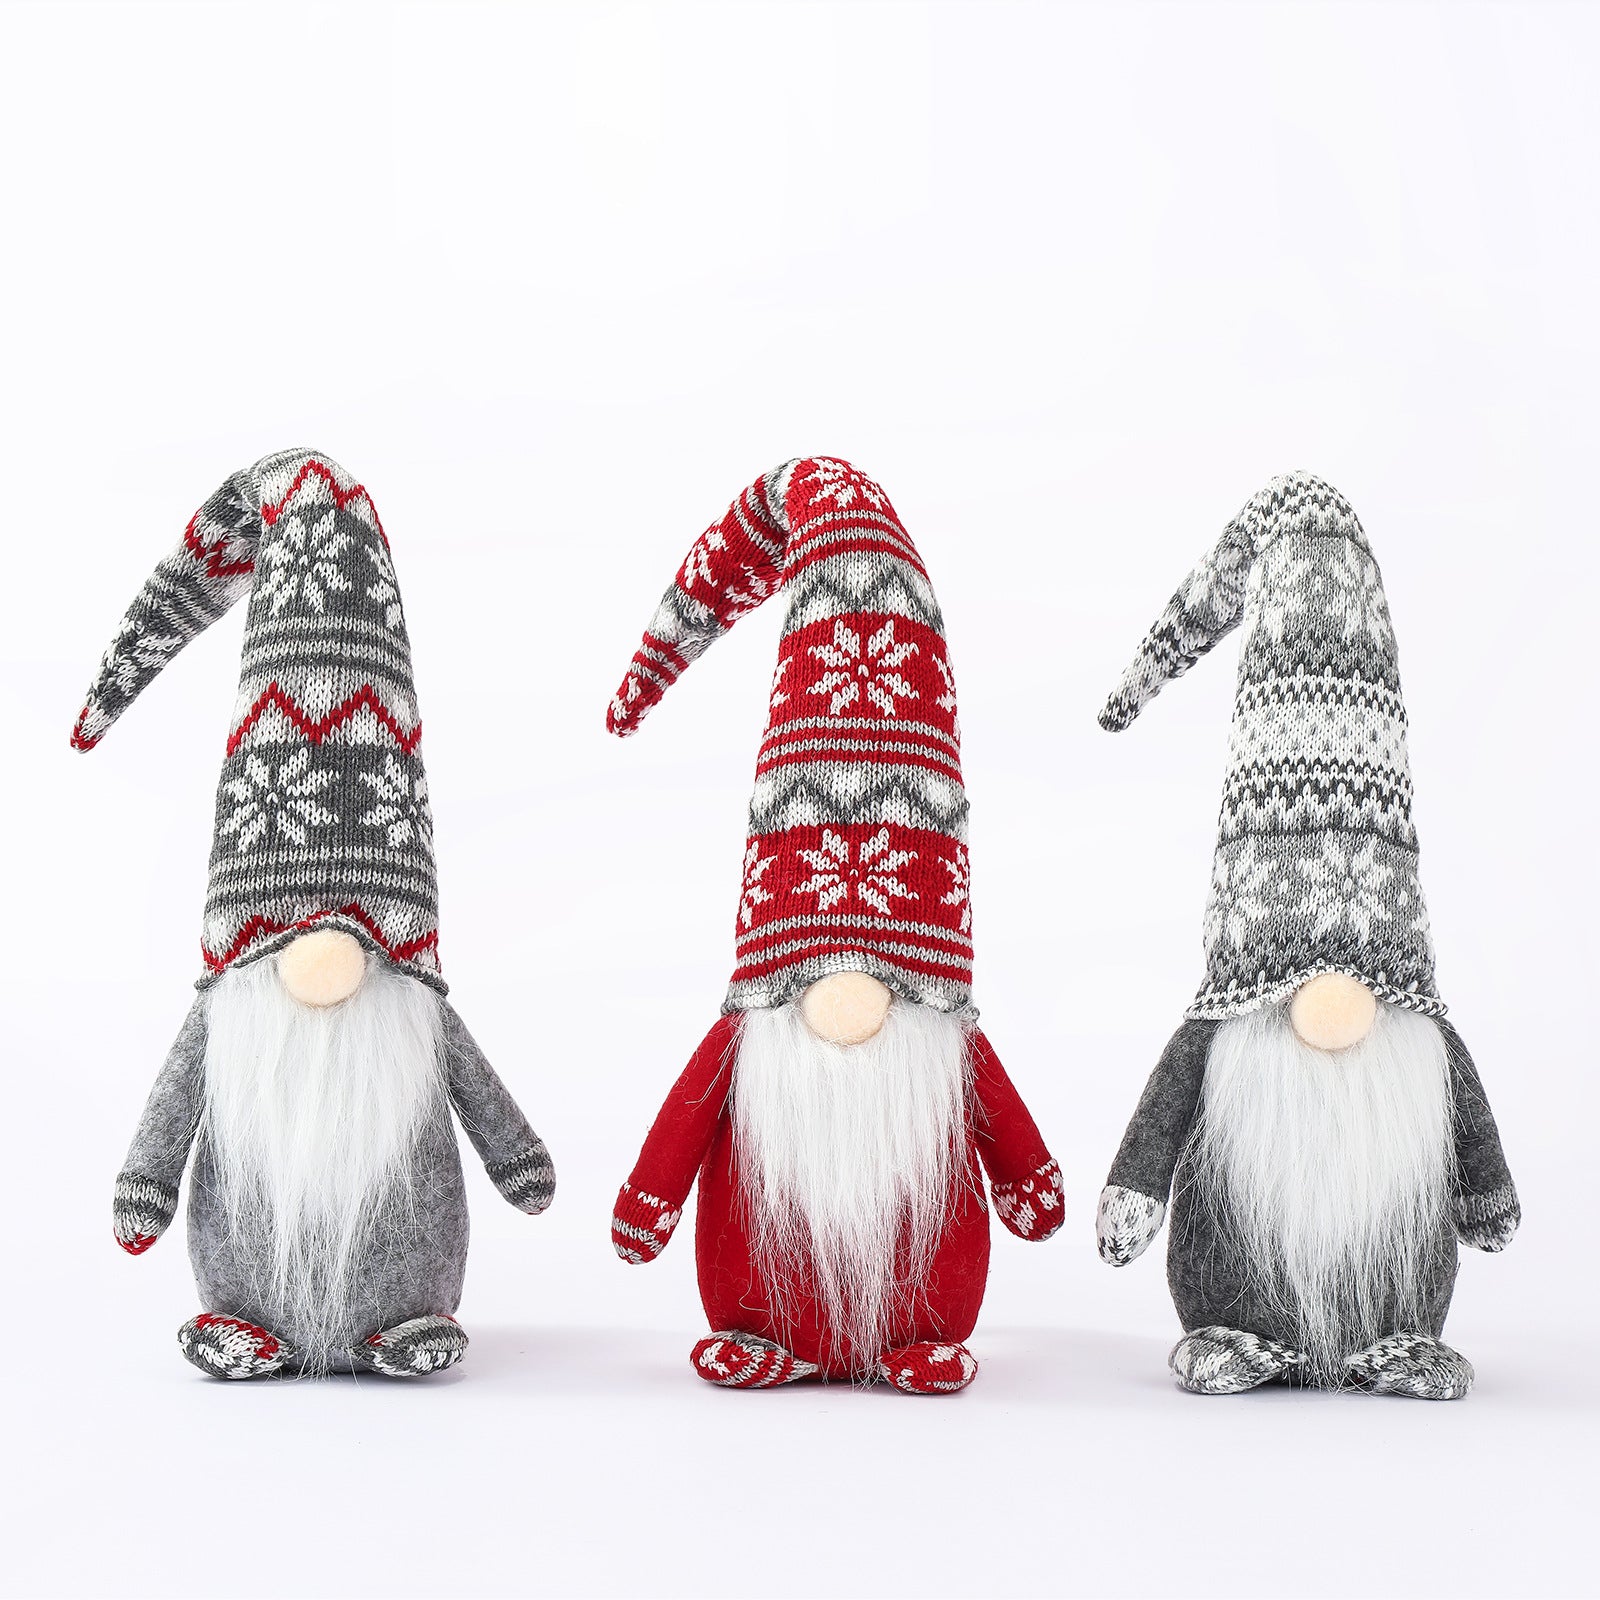 Wholesale Ornament Fabric Faceless Old Man Wool Old Man Window Ornament JWE-OS-ChiY003